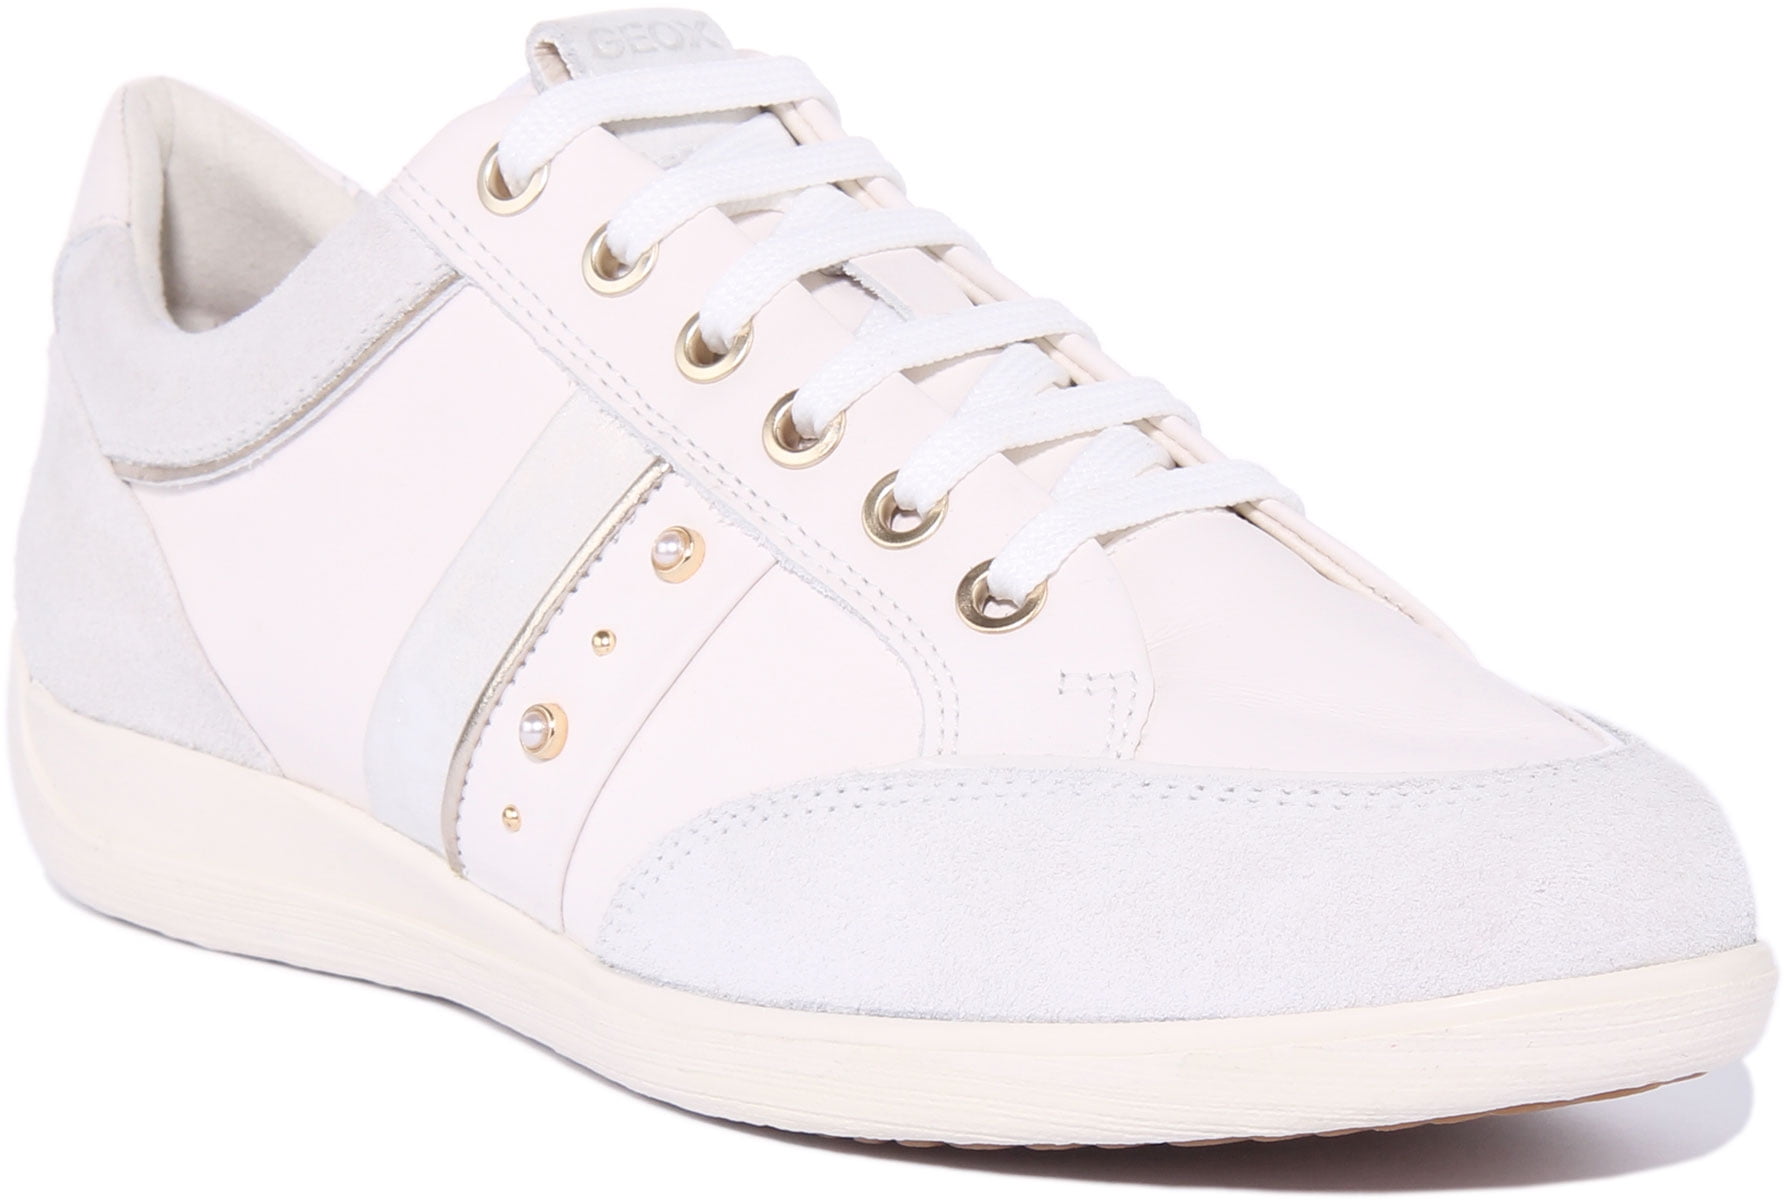 Espere teléfono Pez anémona Geox D Myria Women's Lace Up Leather Trainers With Side Zip In White Size 6  - Walmart.com